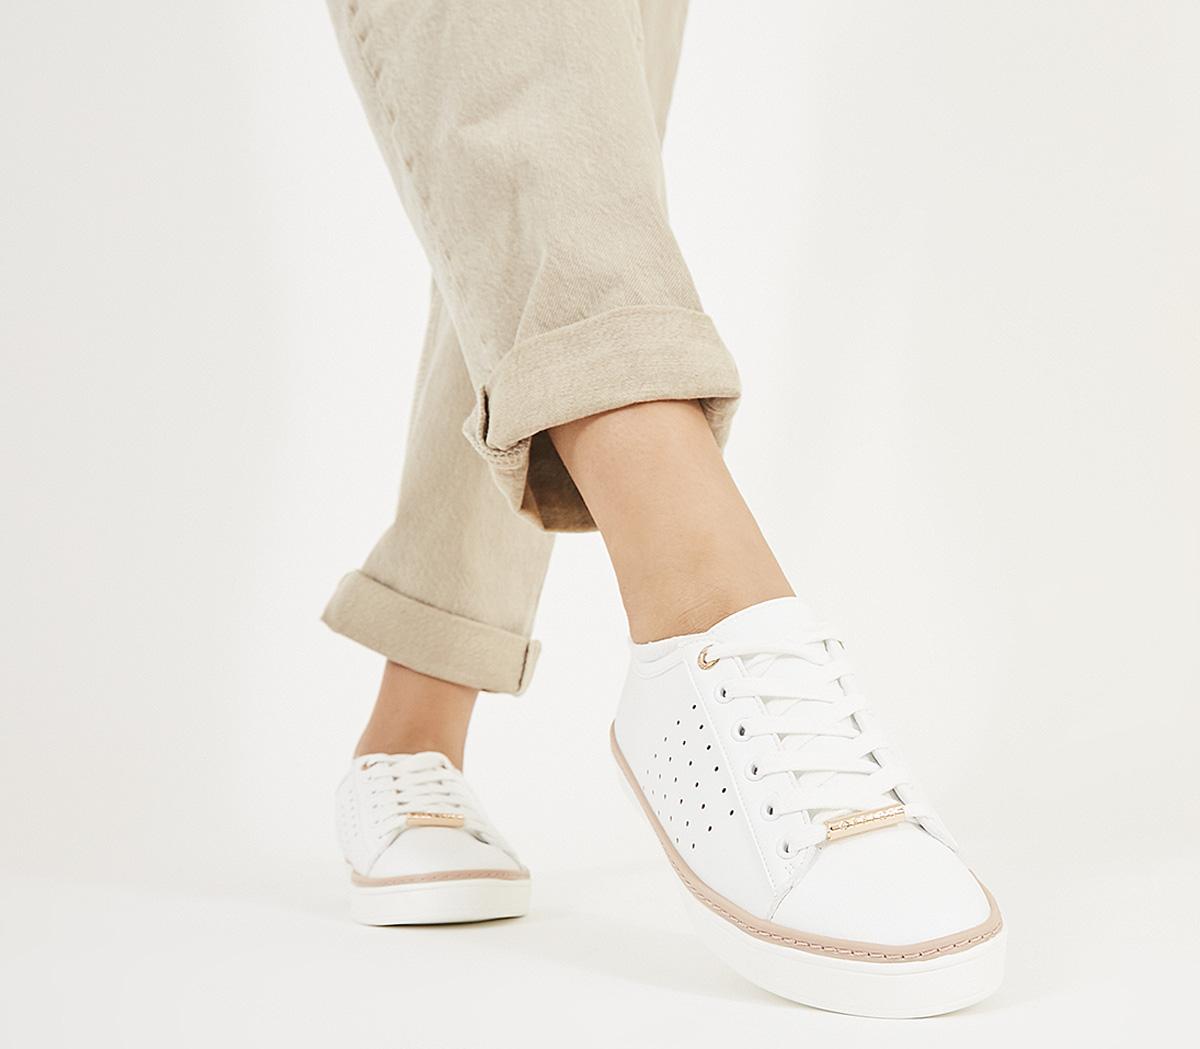 OFFICEFrappuccino Lace Up TrainersWhite Blush Mix